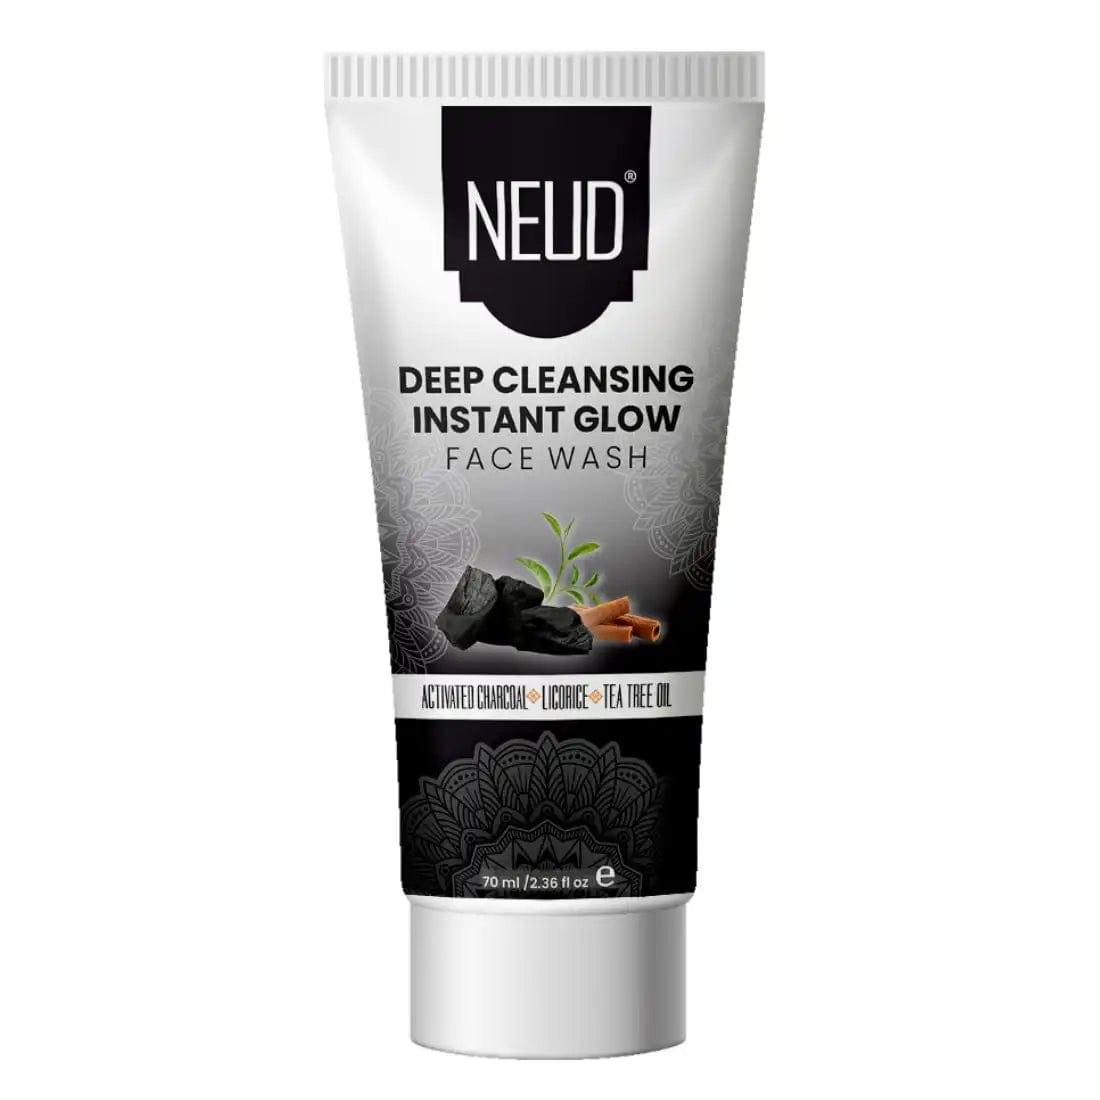 Buy 1 Pack NEUD Deep Cleansing Instant Glow Face Wash for Men and Women - 70ml